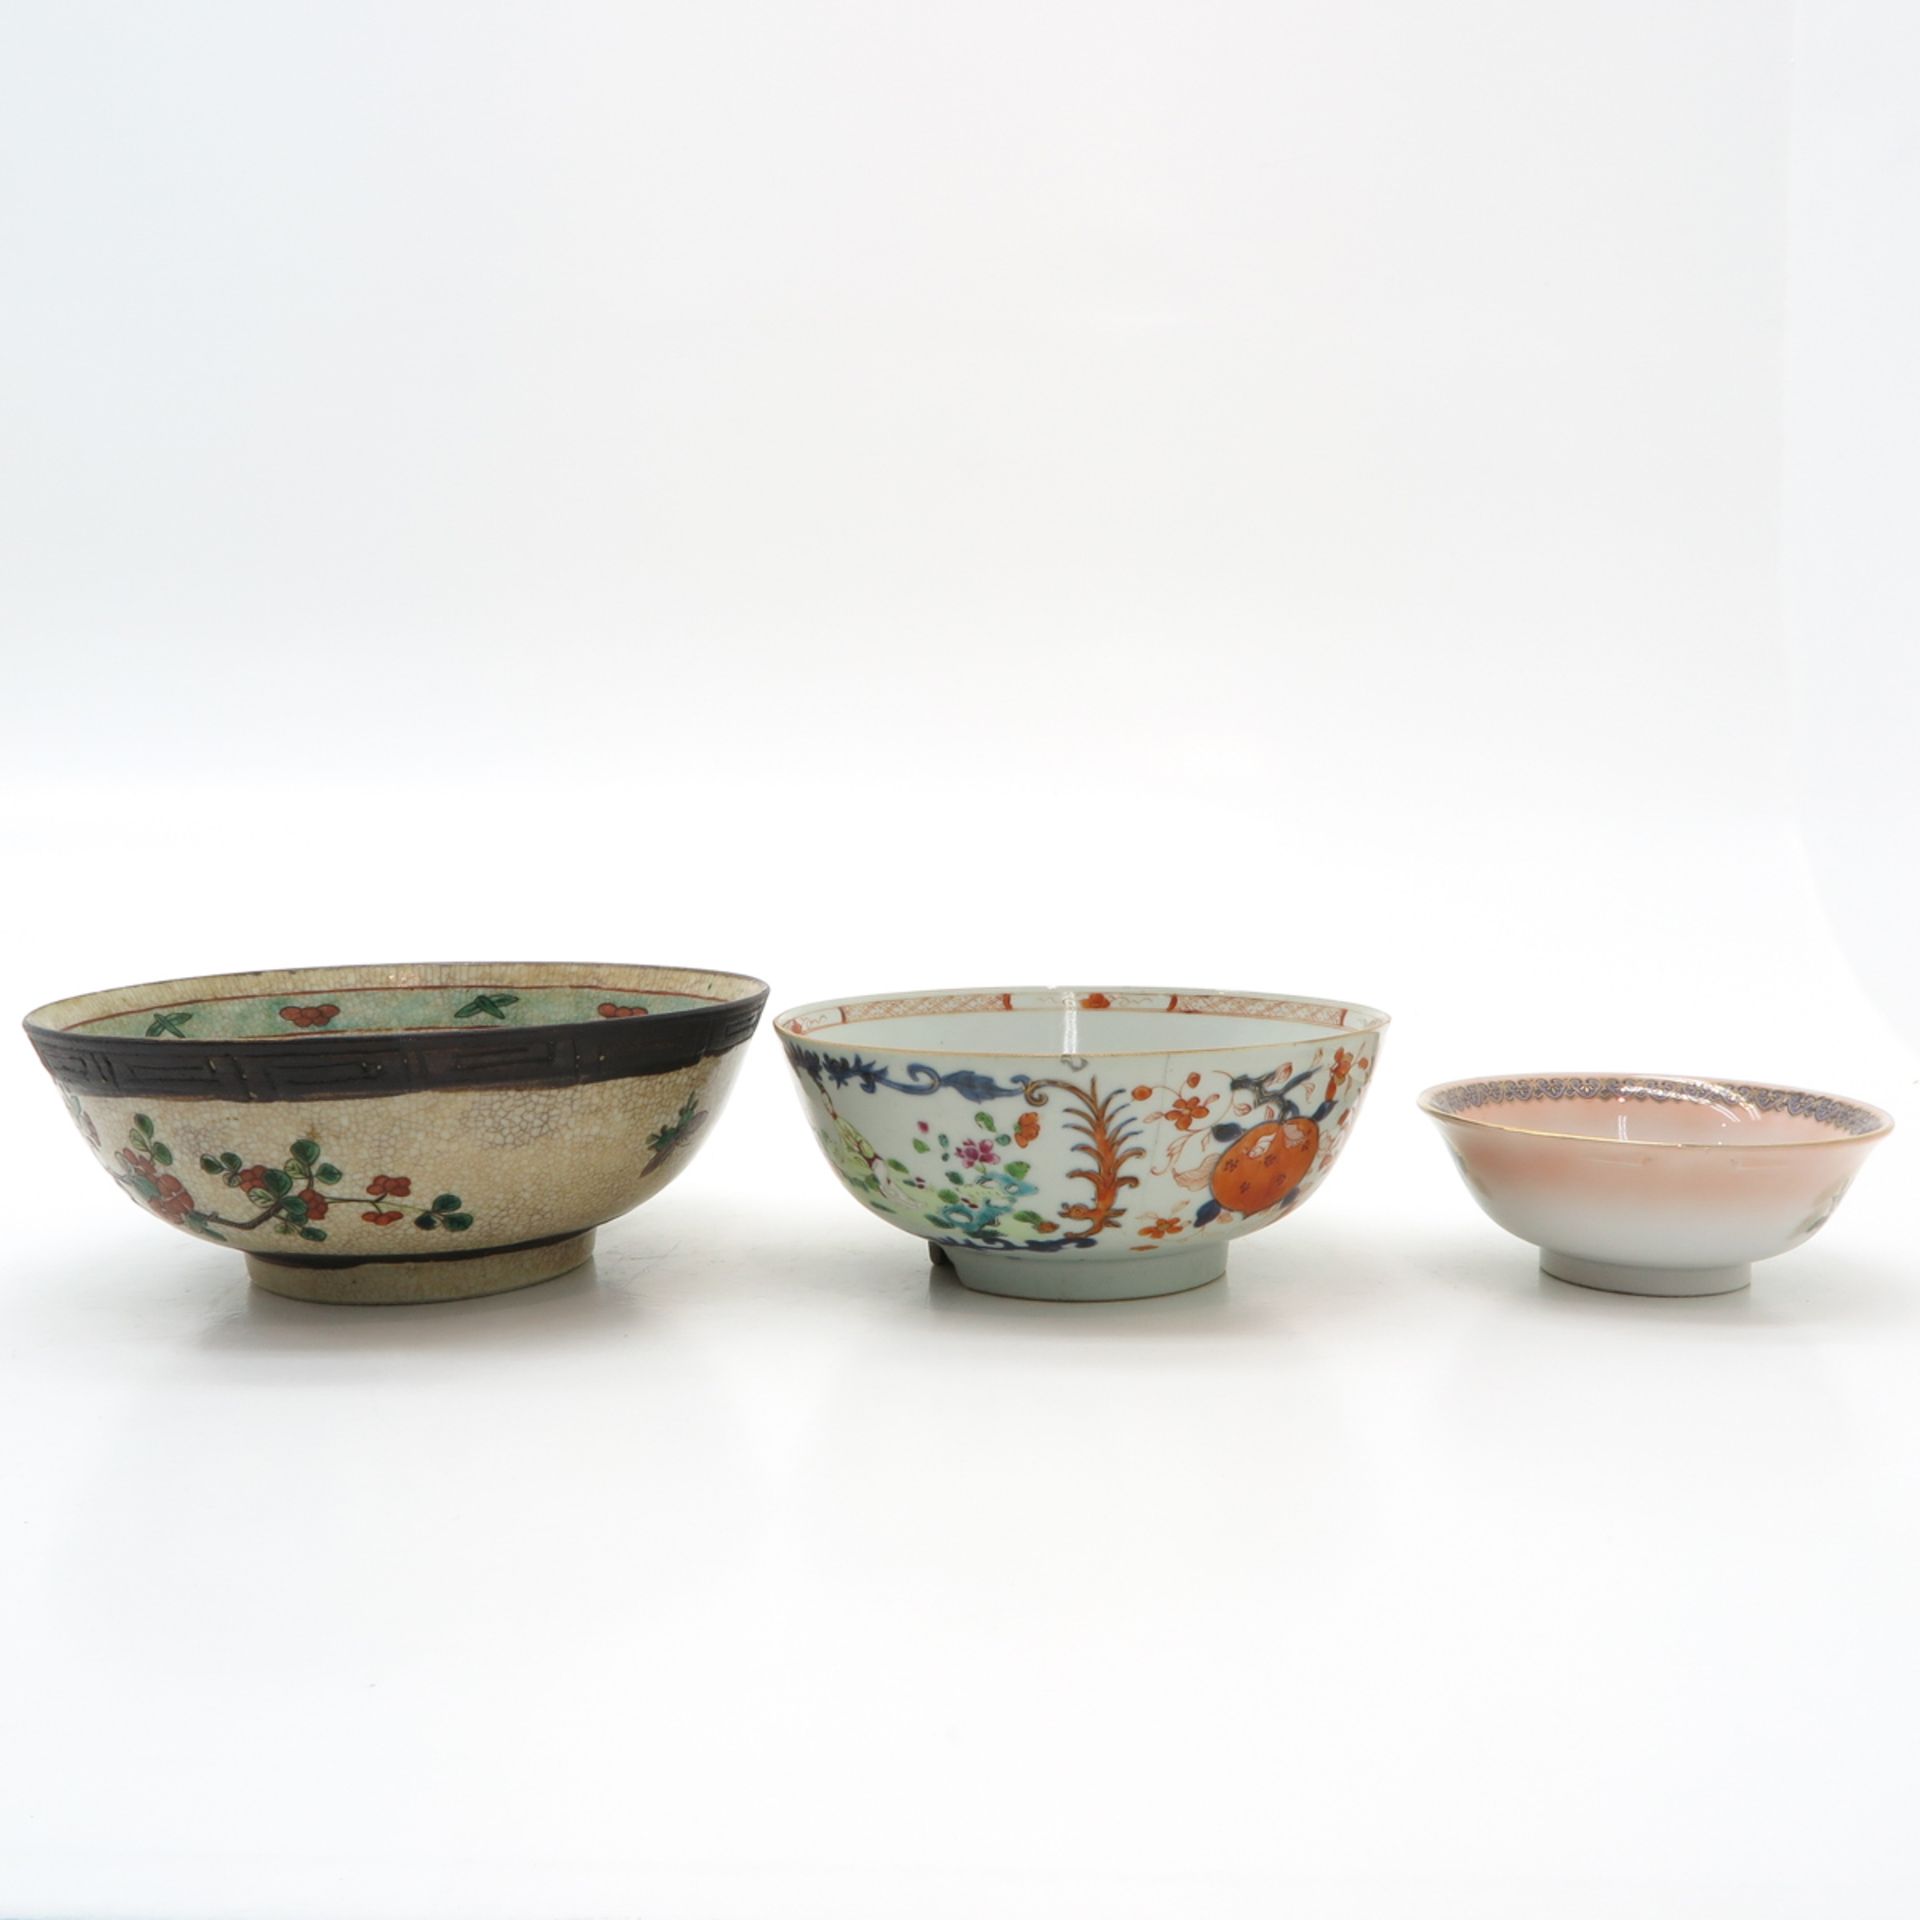 Lot of 3 Bowls - Image 4 of 6